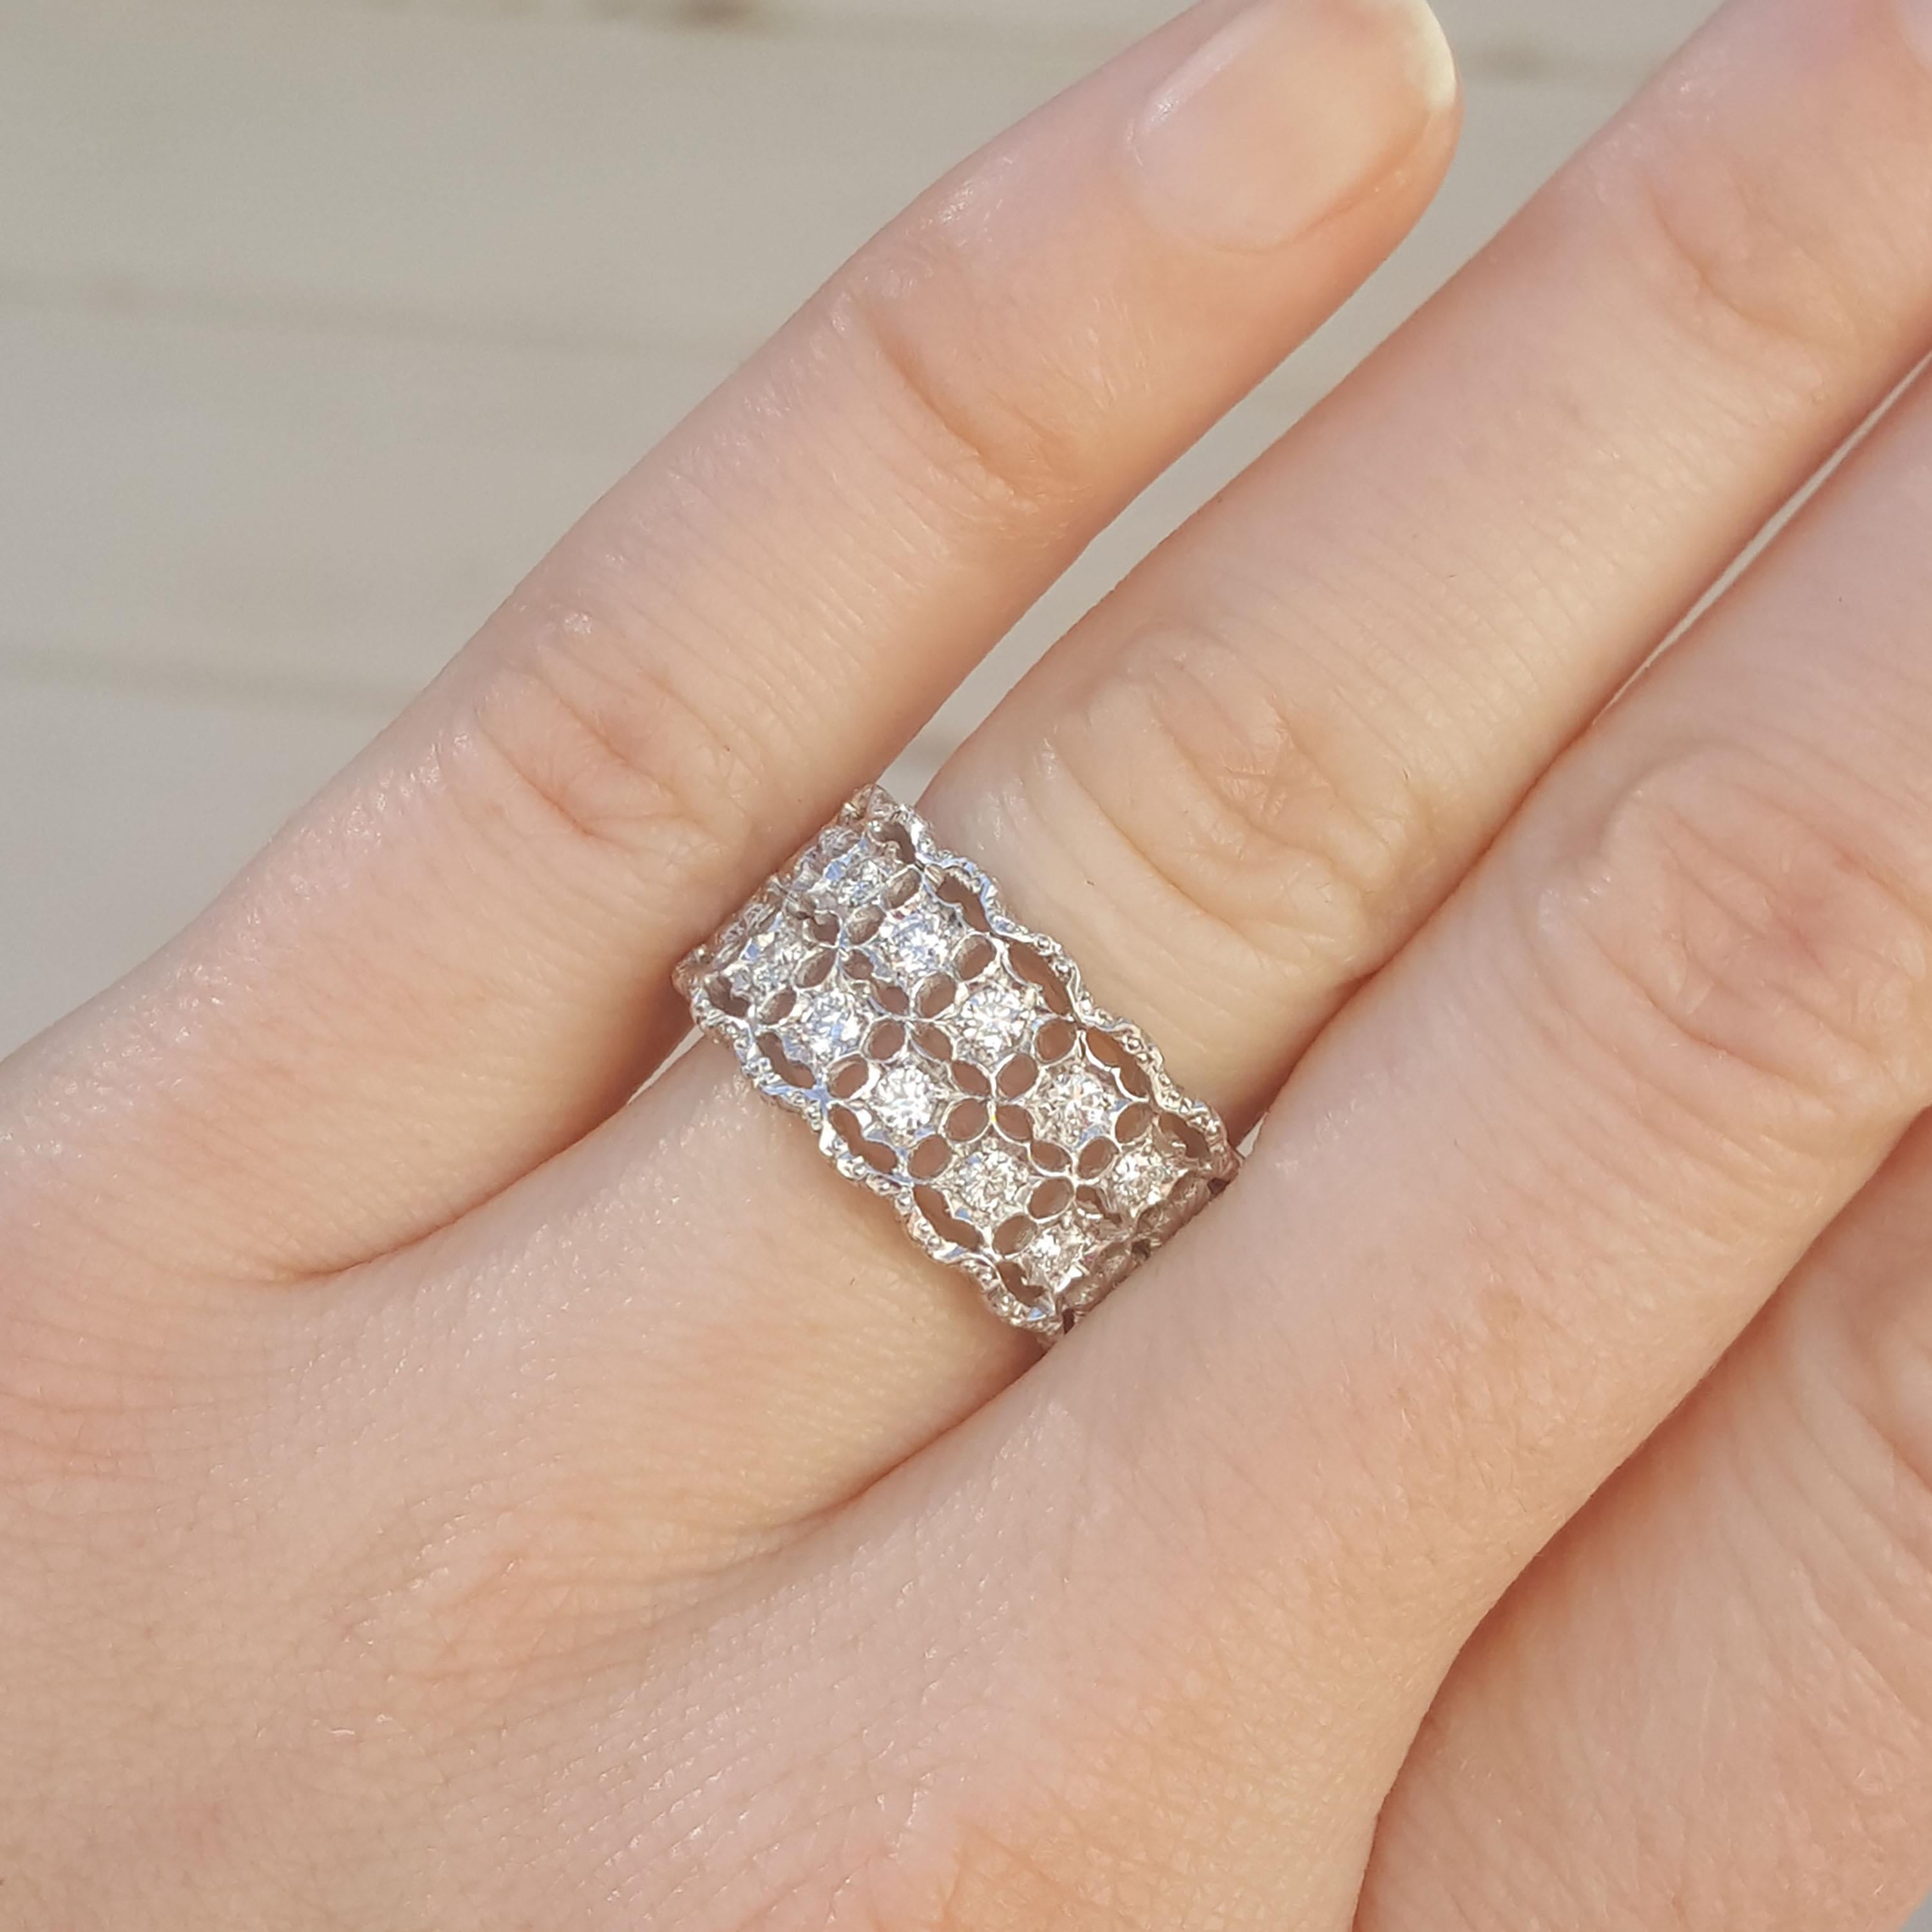 The Stefania collection is all grace and delicacy, and this wide band is an excellent example. Two rows of beautiful diamonds are held in an all white scalloped setting, entirely hand-fabricated and hand-engraved.

This wide diamond band has great